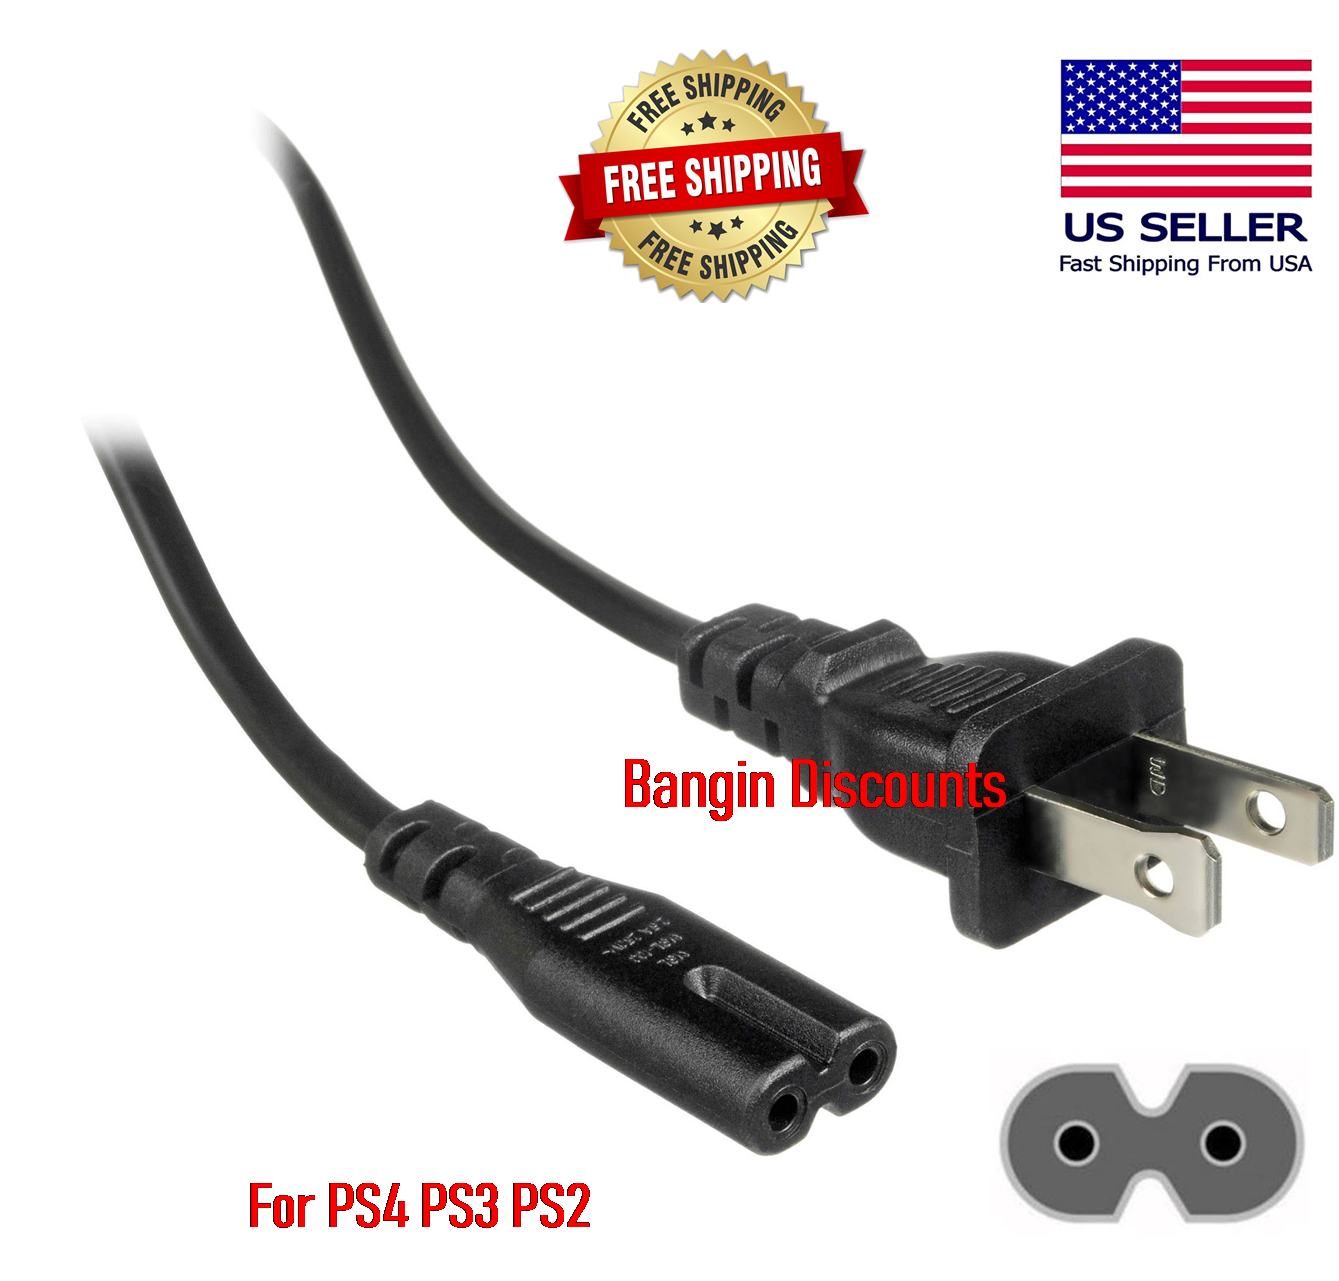 Ps4 Ac Power Cord Cable For Original Playstation Ps2 Ps3 Ps4 Slim / Super Slim